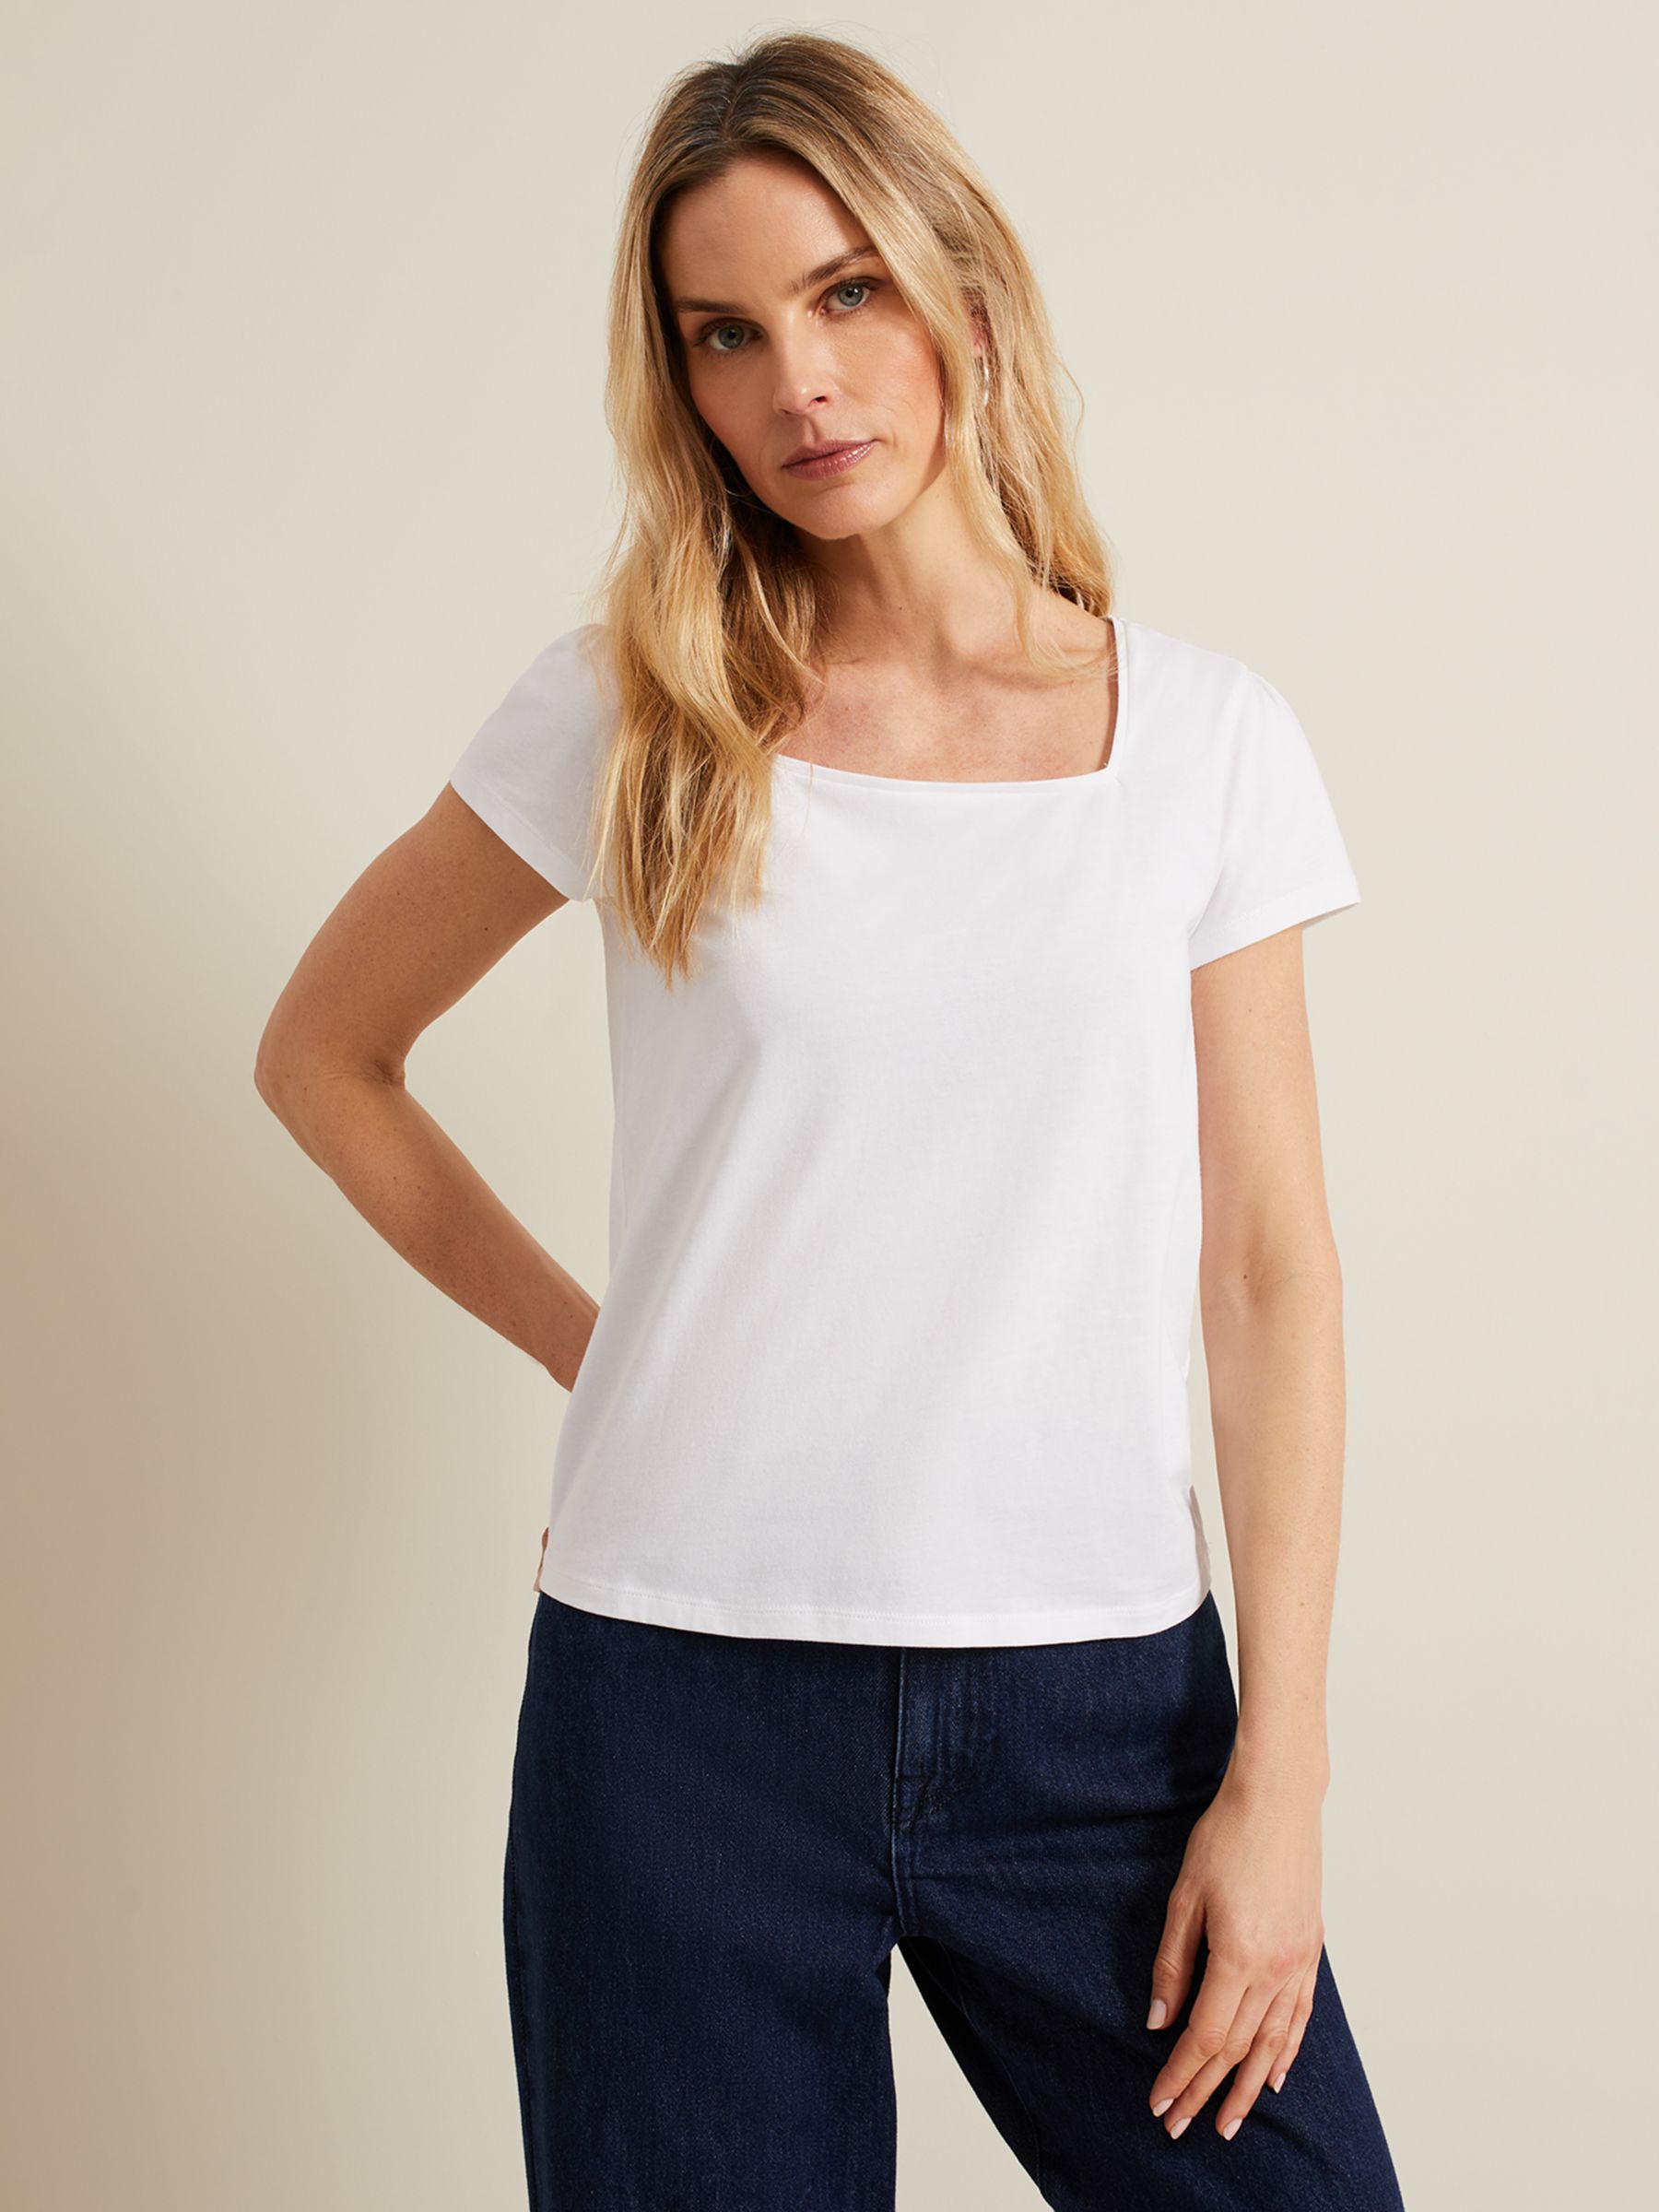 Women's Square Neck Shirts & Tops